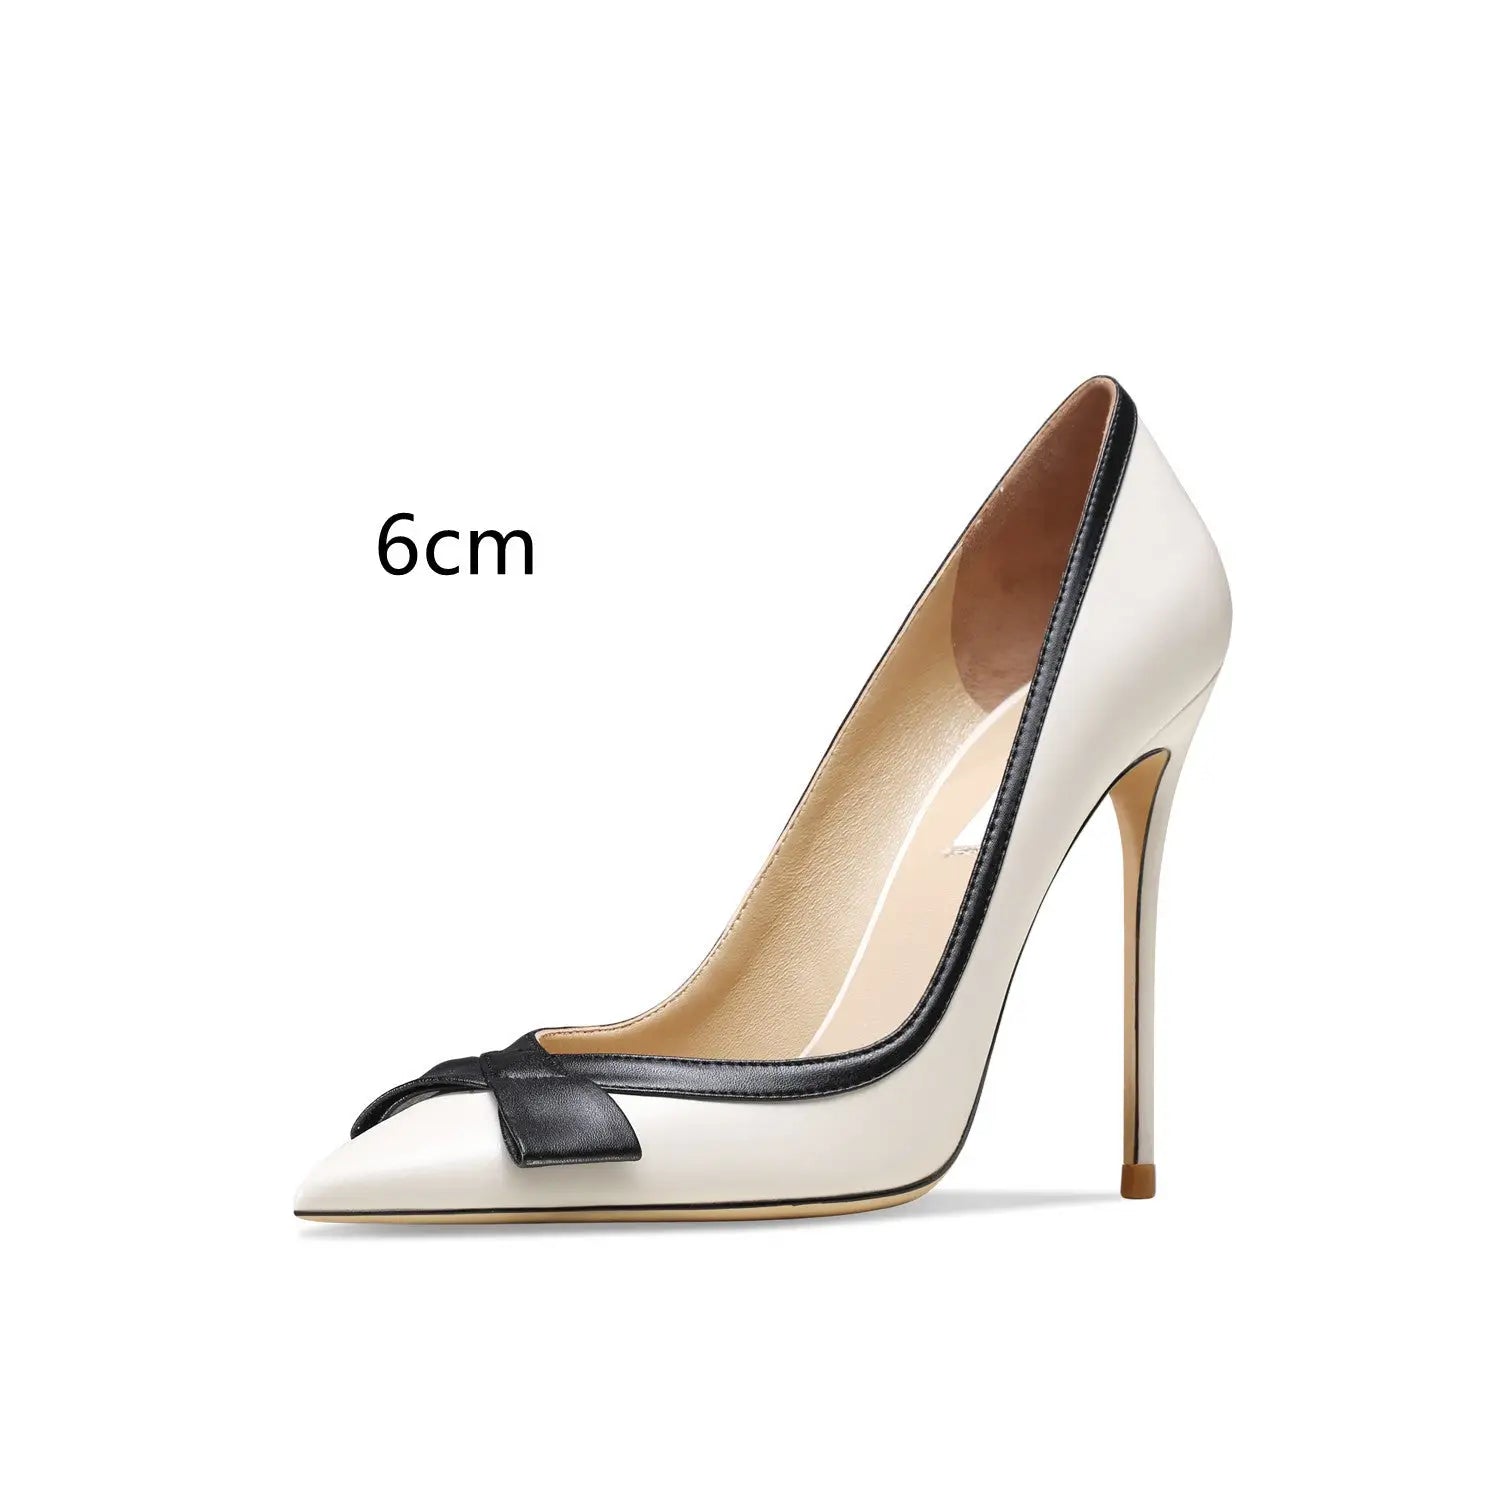 Perfect leather stiletto high heels - apricot / surface 6cm / 33 - pumps